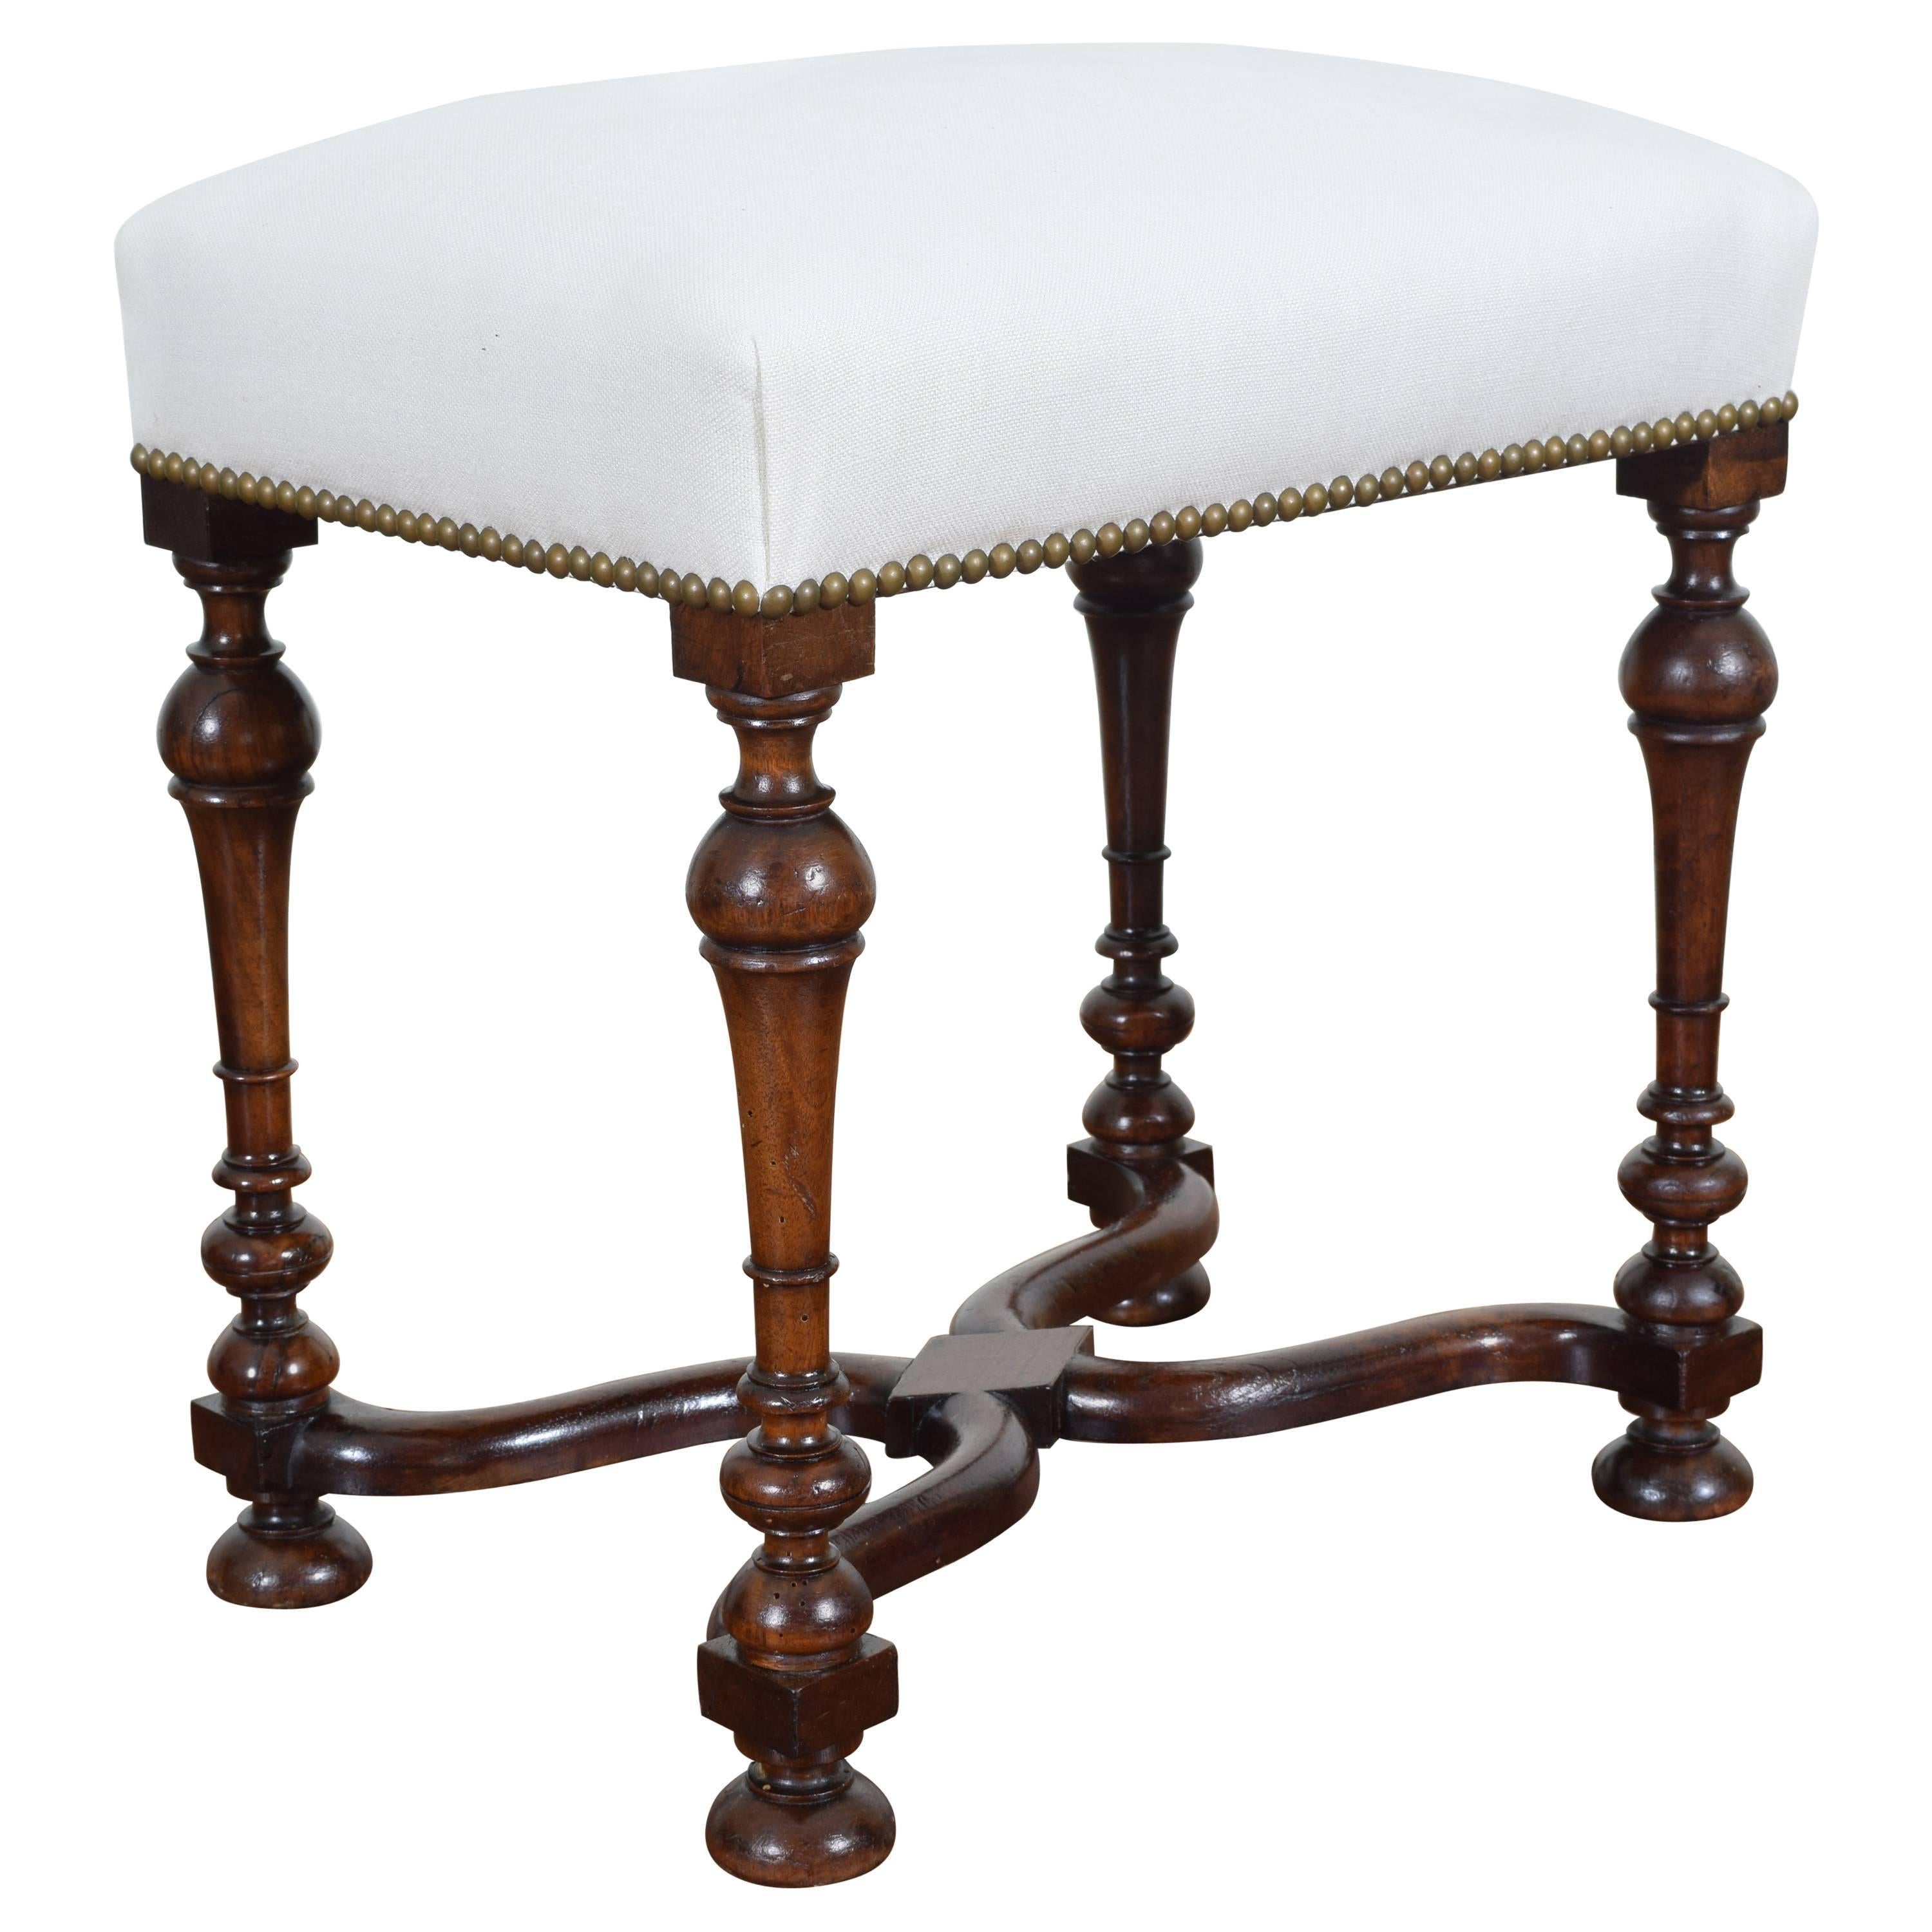 French Turned Walnut Bench in the Louis XIII Style, Second Half of 19th Century